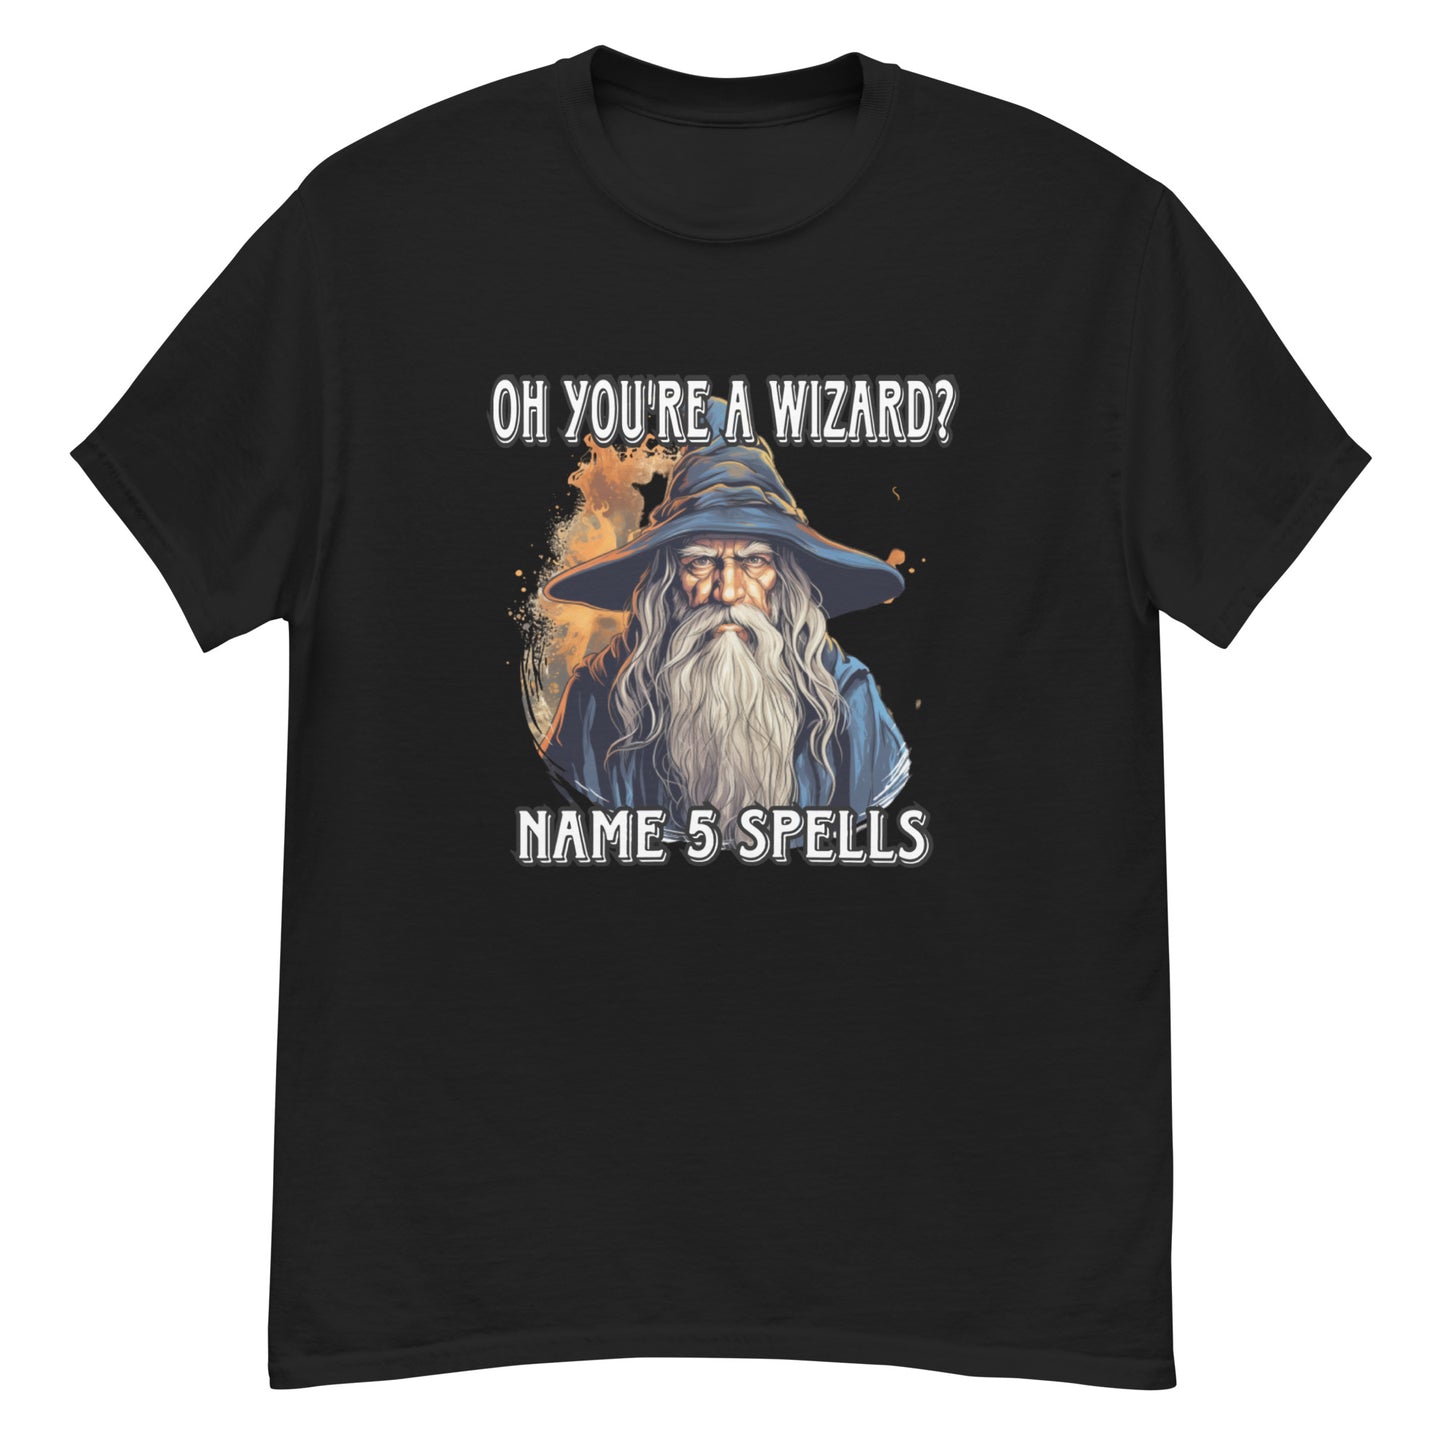 Oh you’re a wizard? Name 5 spells